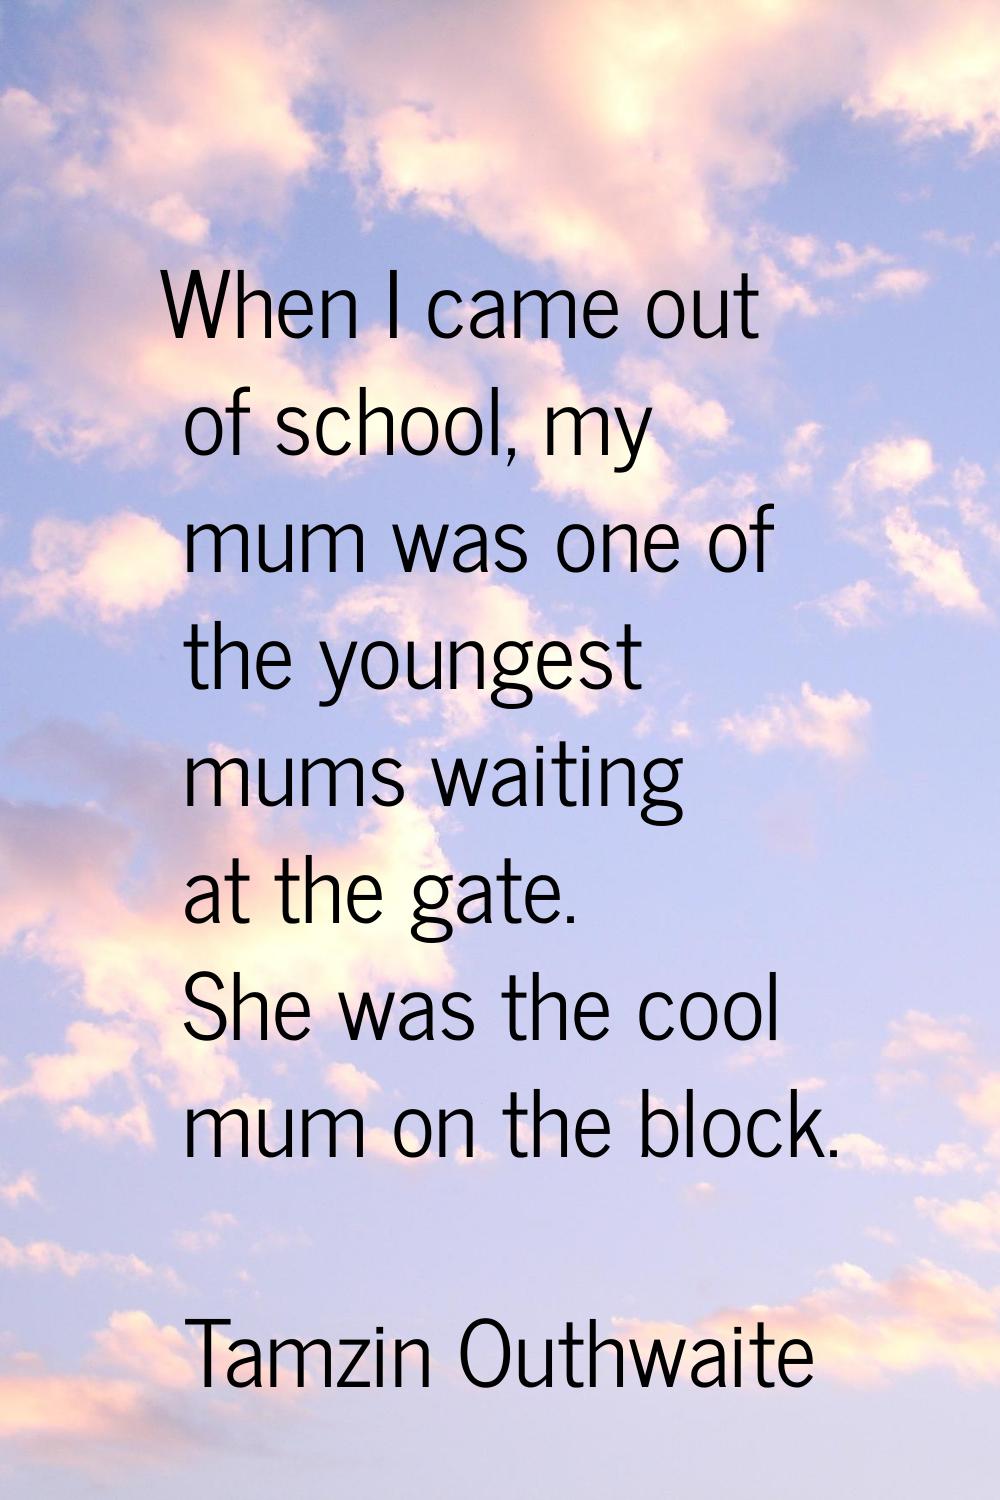 When I came out of school, my mum was one of the youngest mums waiting at the gate. She was the coo